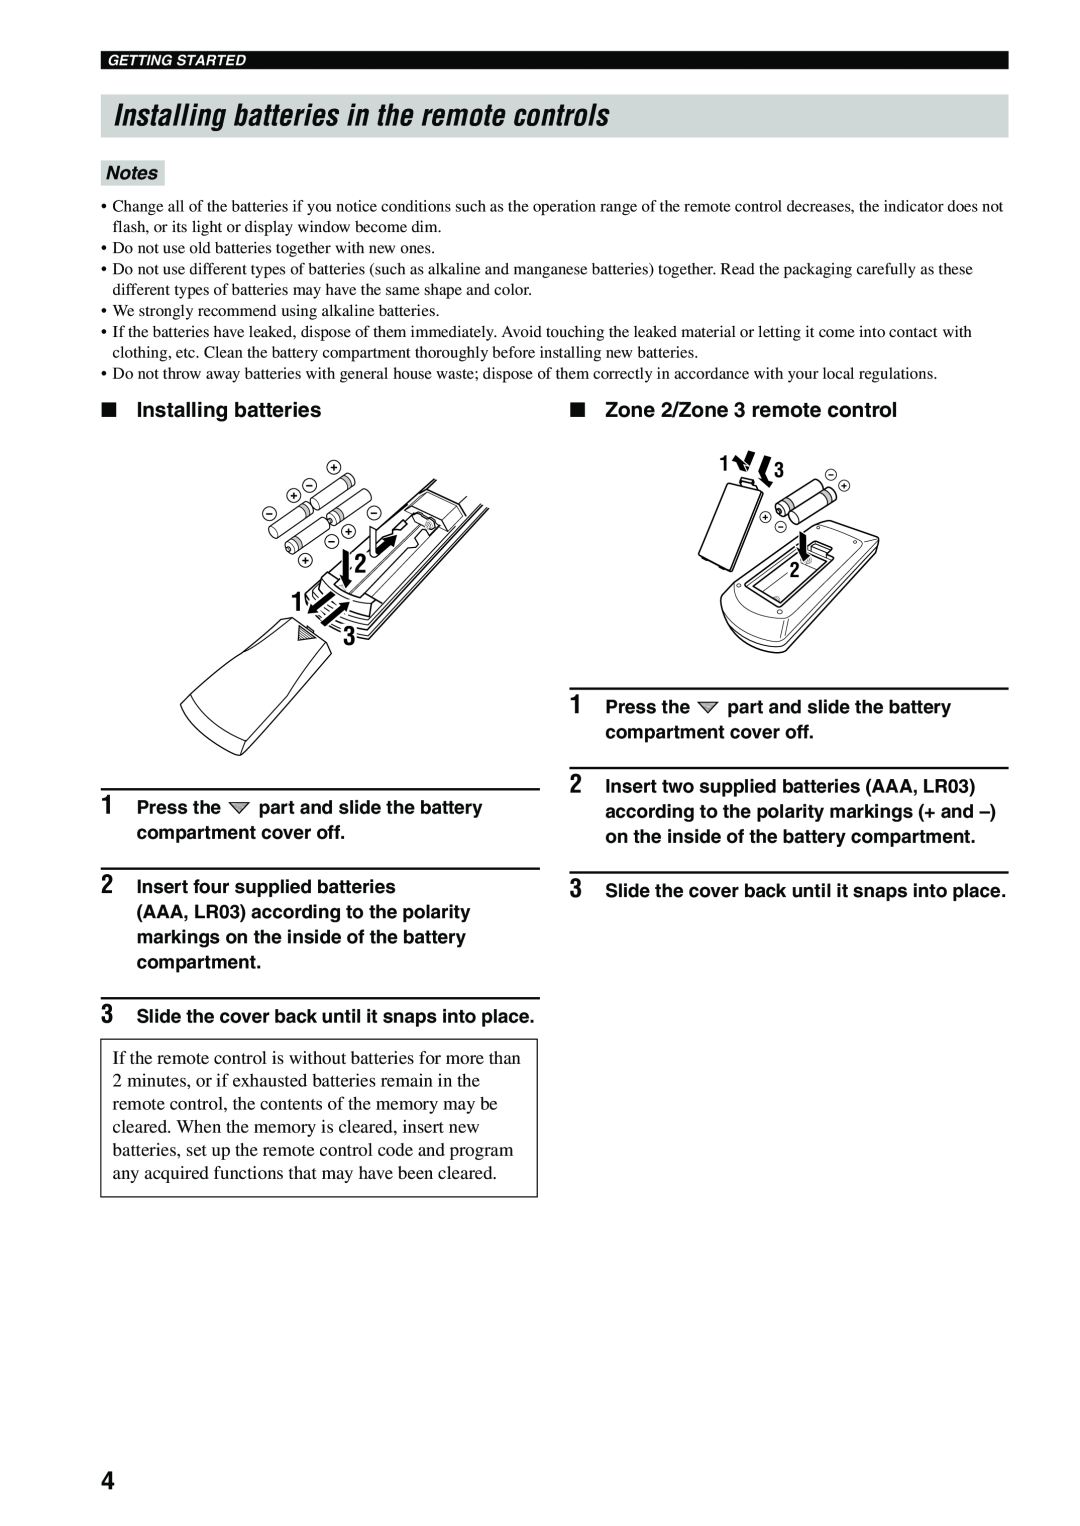 Yamaha X-V2600 owner manual Installing batteries in the remote controls, Zone 2/Zone 3 remote control, Notes 